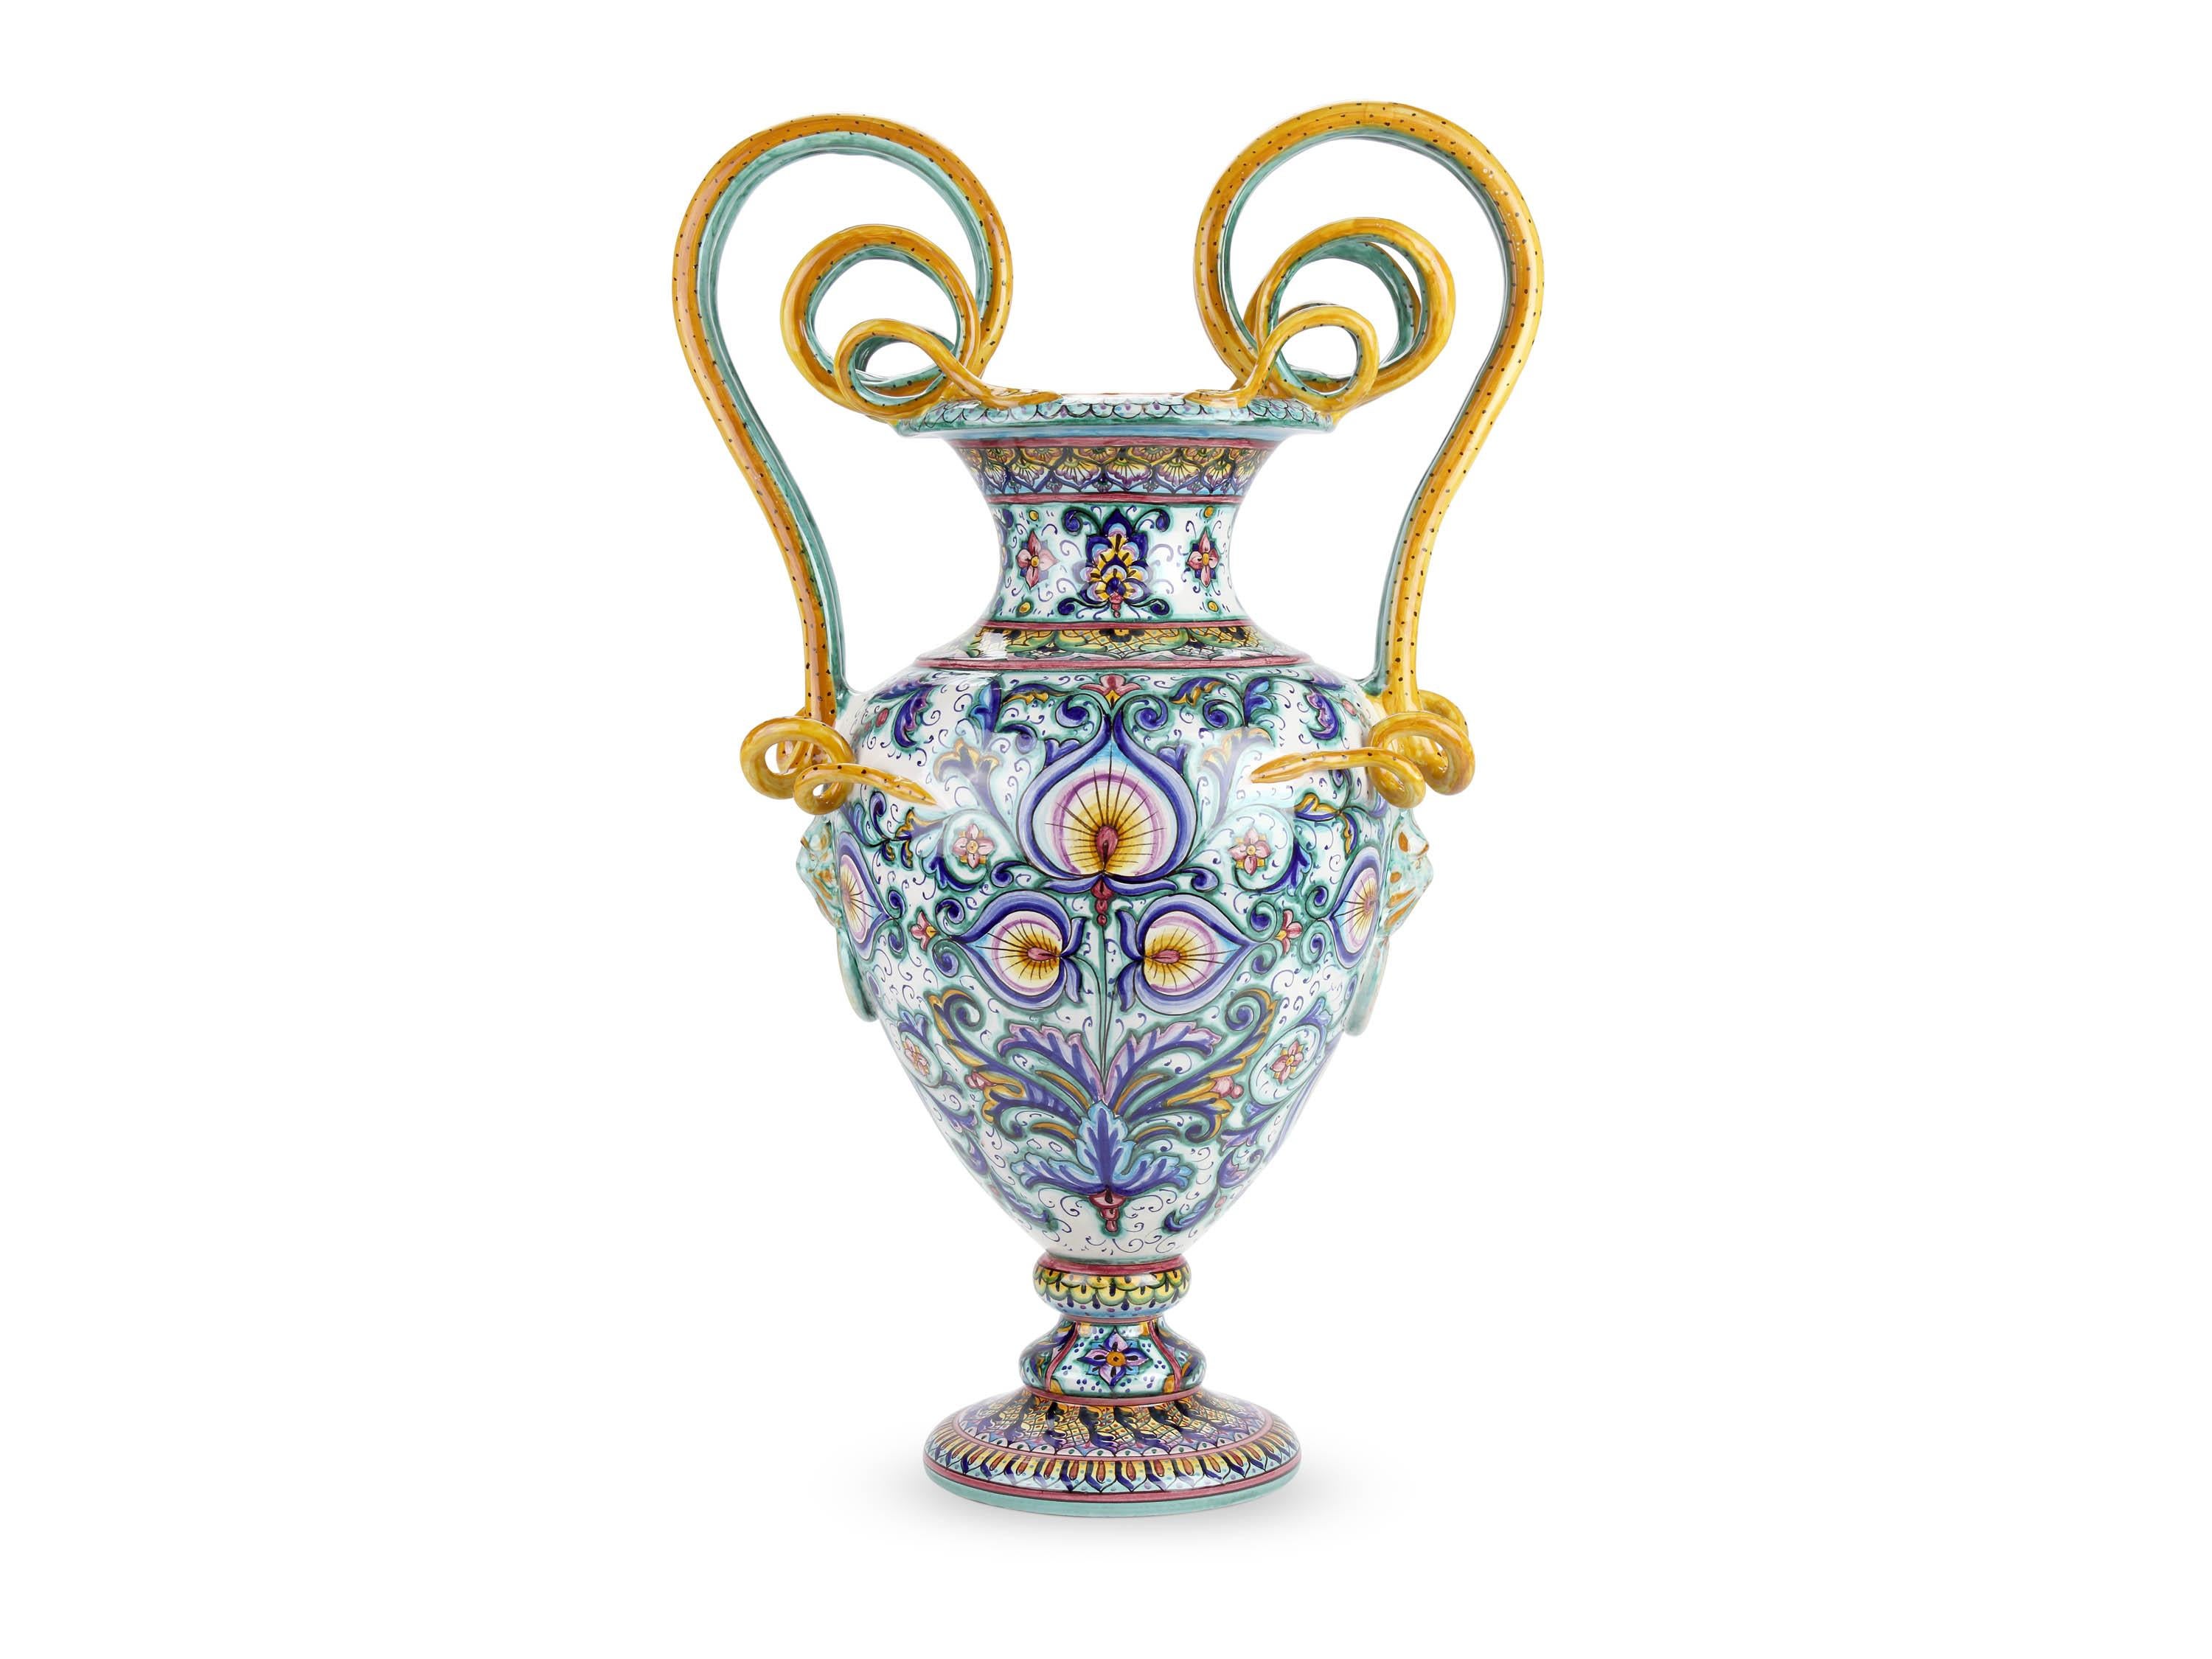 This large luxurious amphora, in majolica handmade in Italy and hand-painted in polychrome, is characterized by a dense presence of naturalistic ornamental motifs that decorate the various parts of the vase following the original Renaissance